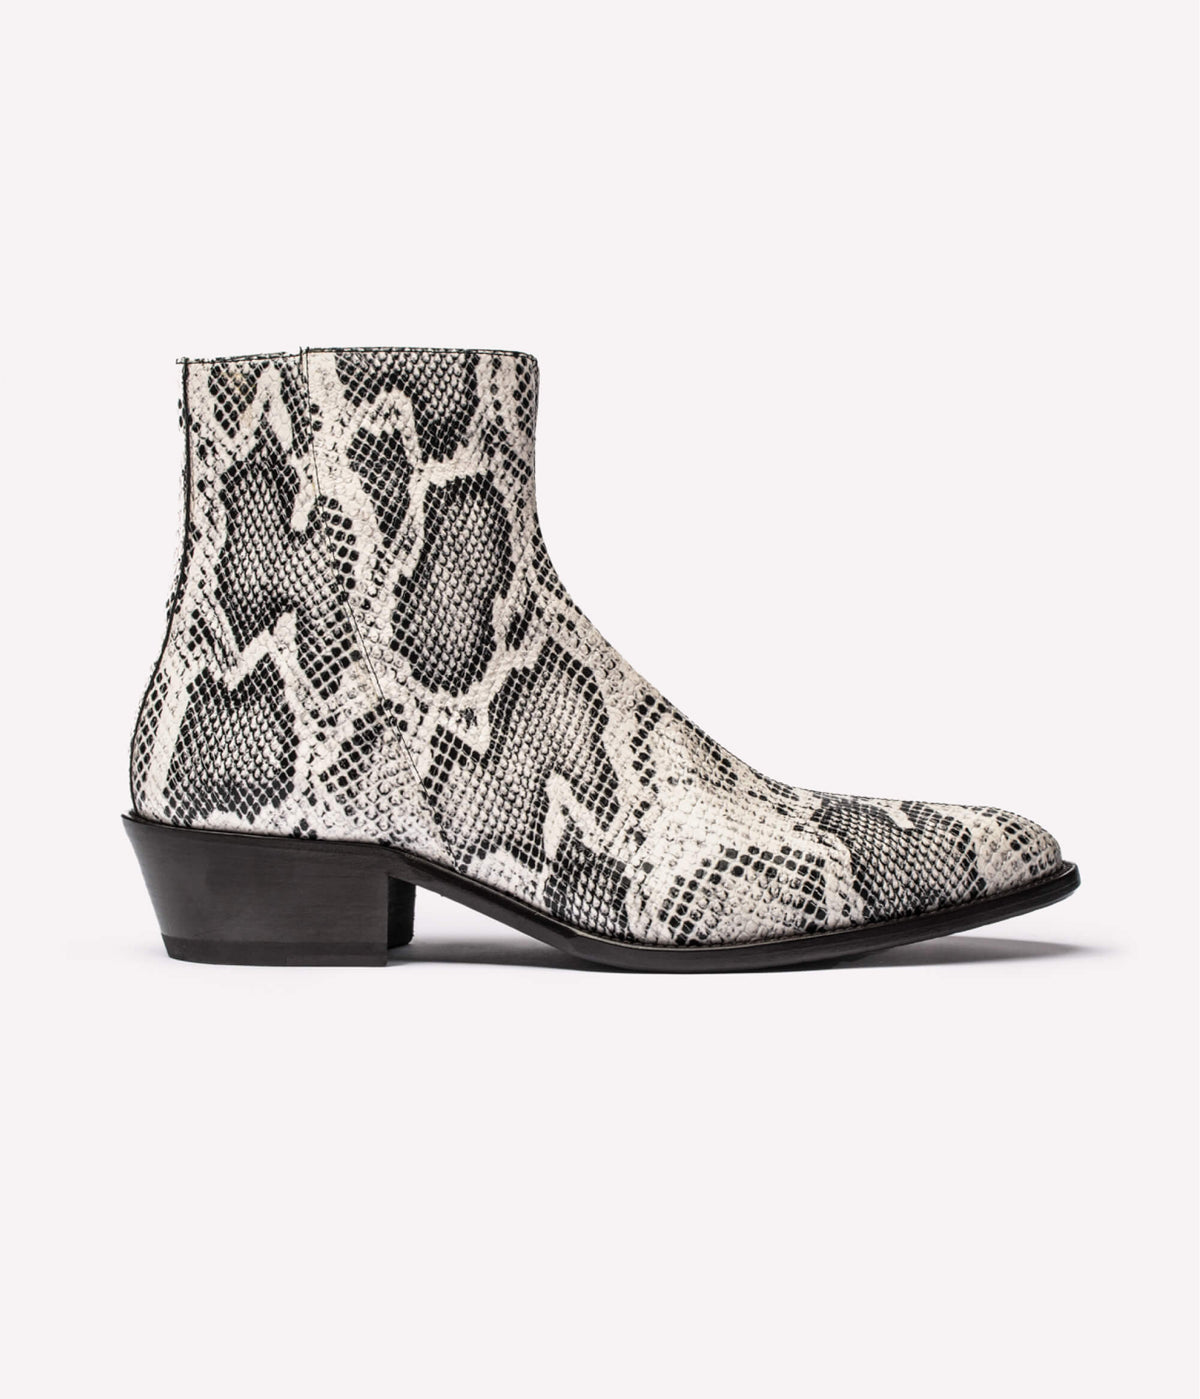 HUMAN RECREATIONAL SERVICES LUTHER BOOT IN WHITE SNAKE PRINT ITALIAN LEATHER